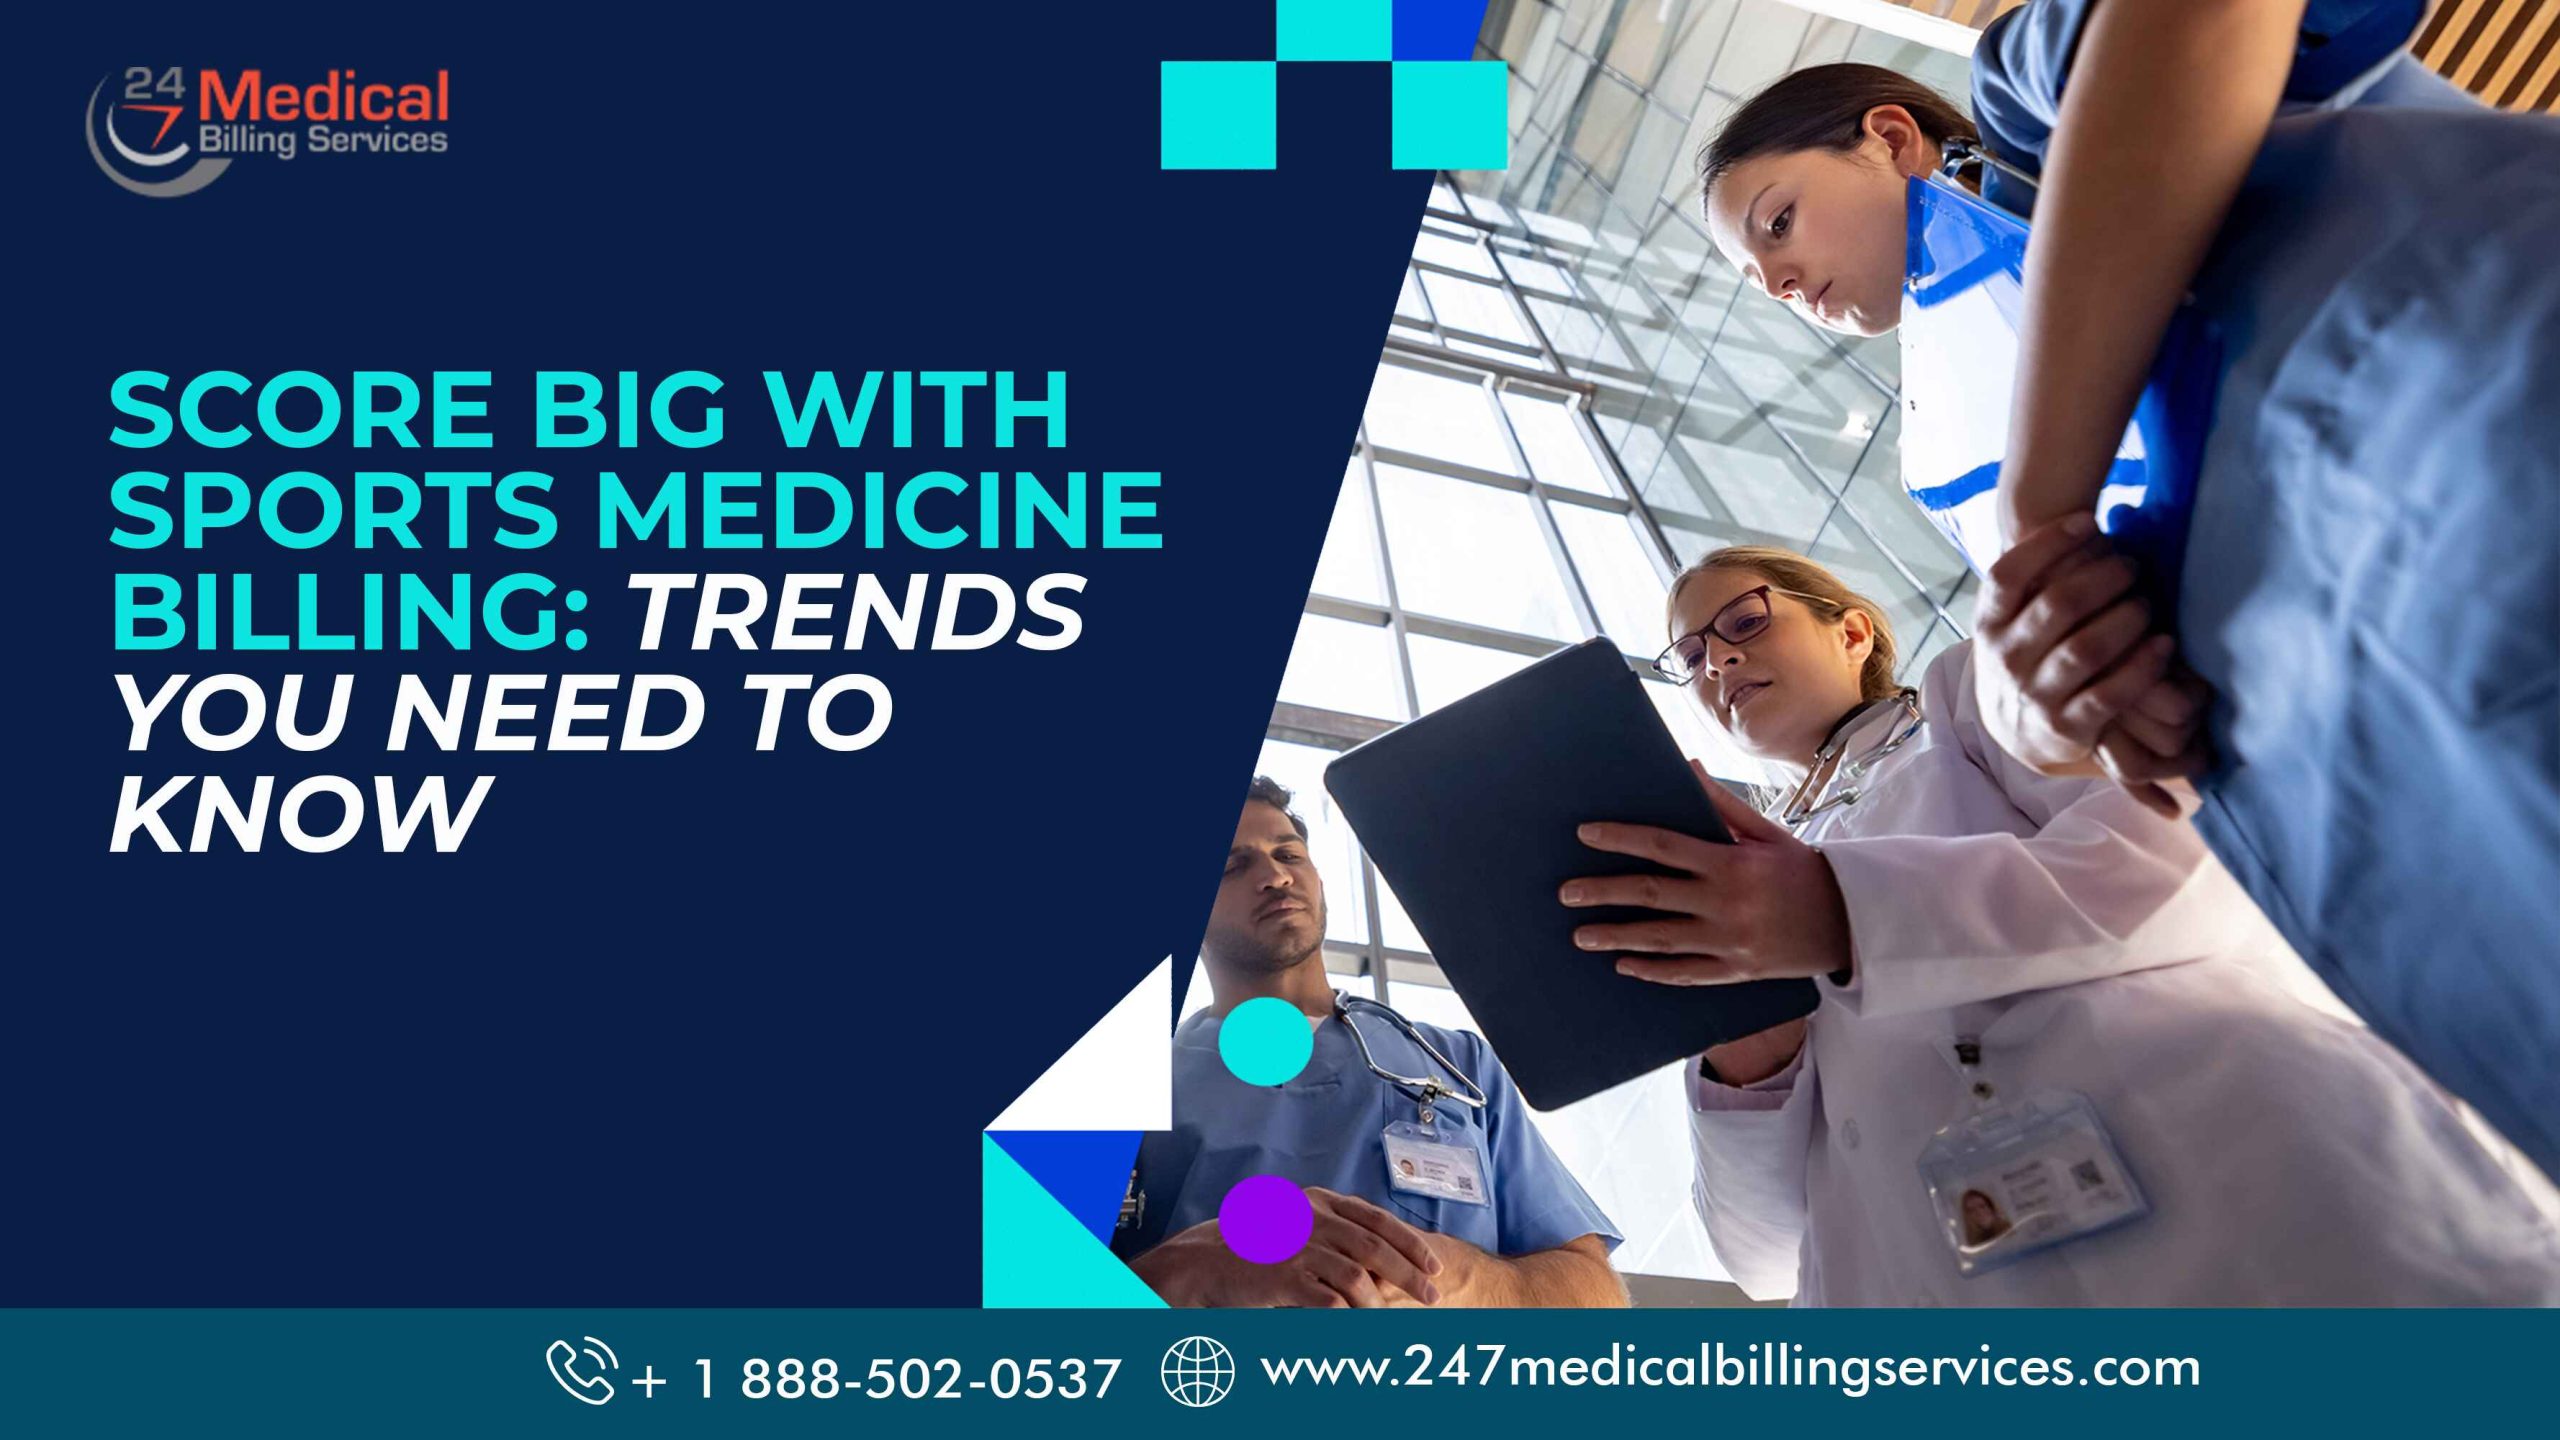 Maximize revenue and accuracy in sports medicine billing with latest trends and strategies. Stay ahead of the game with us.